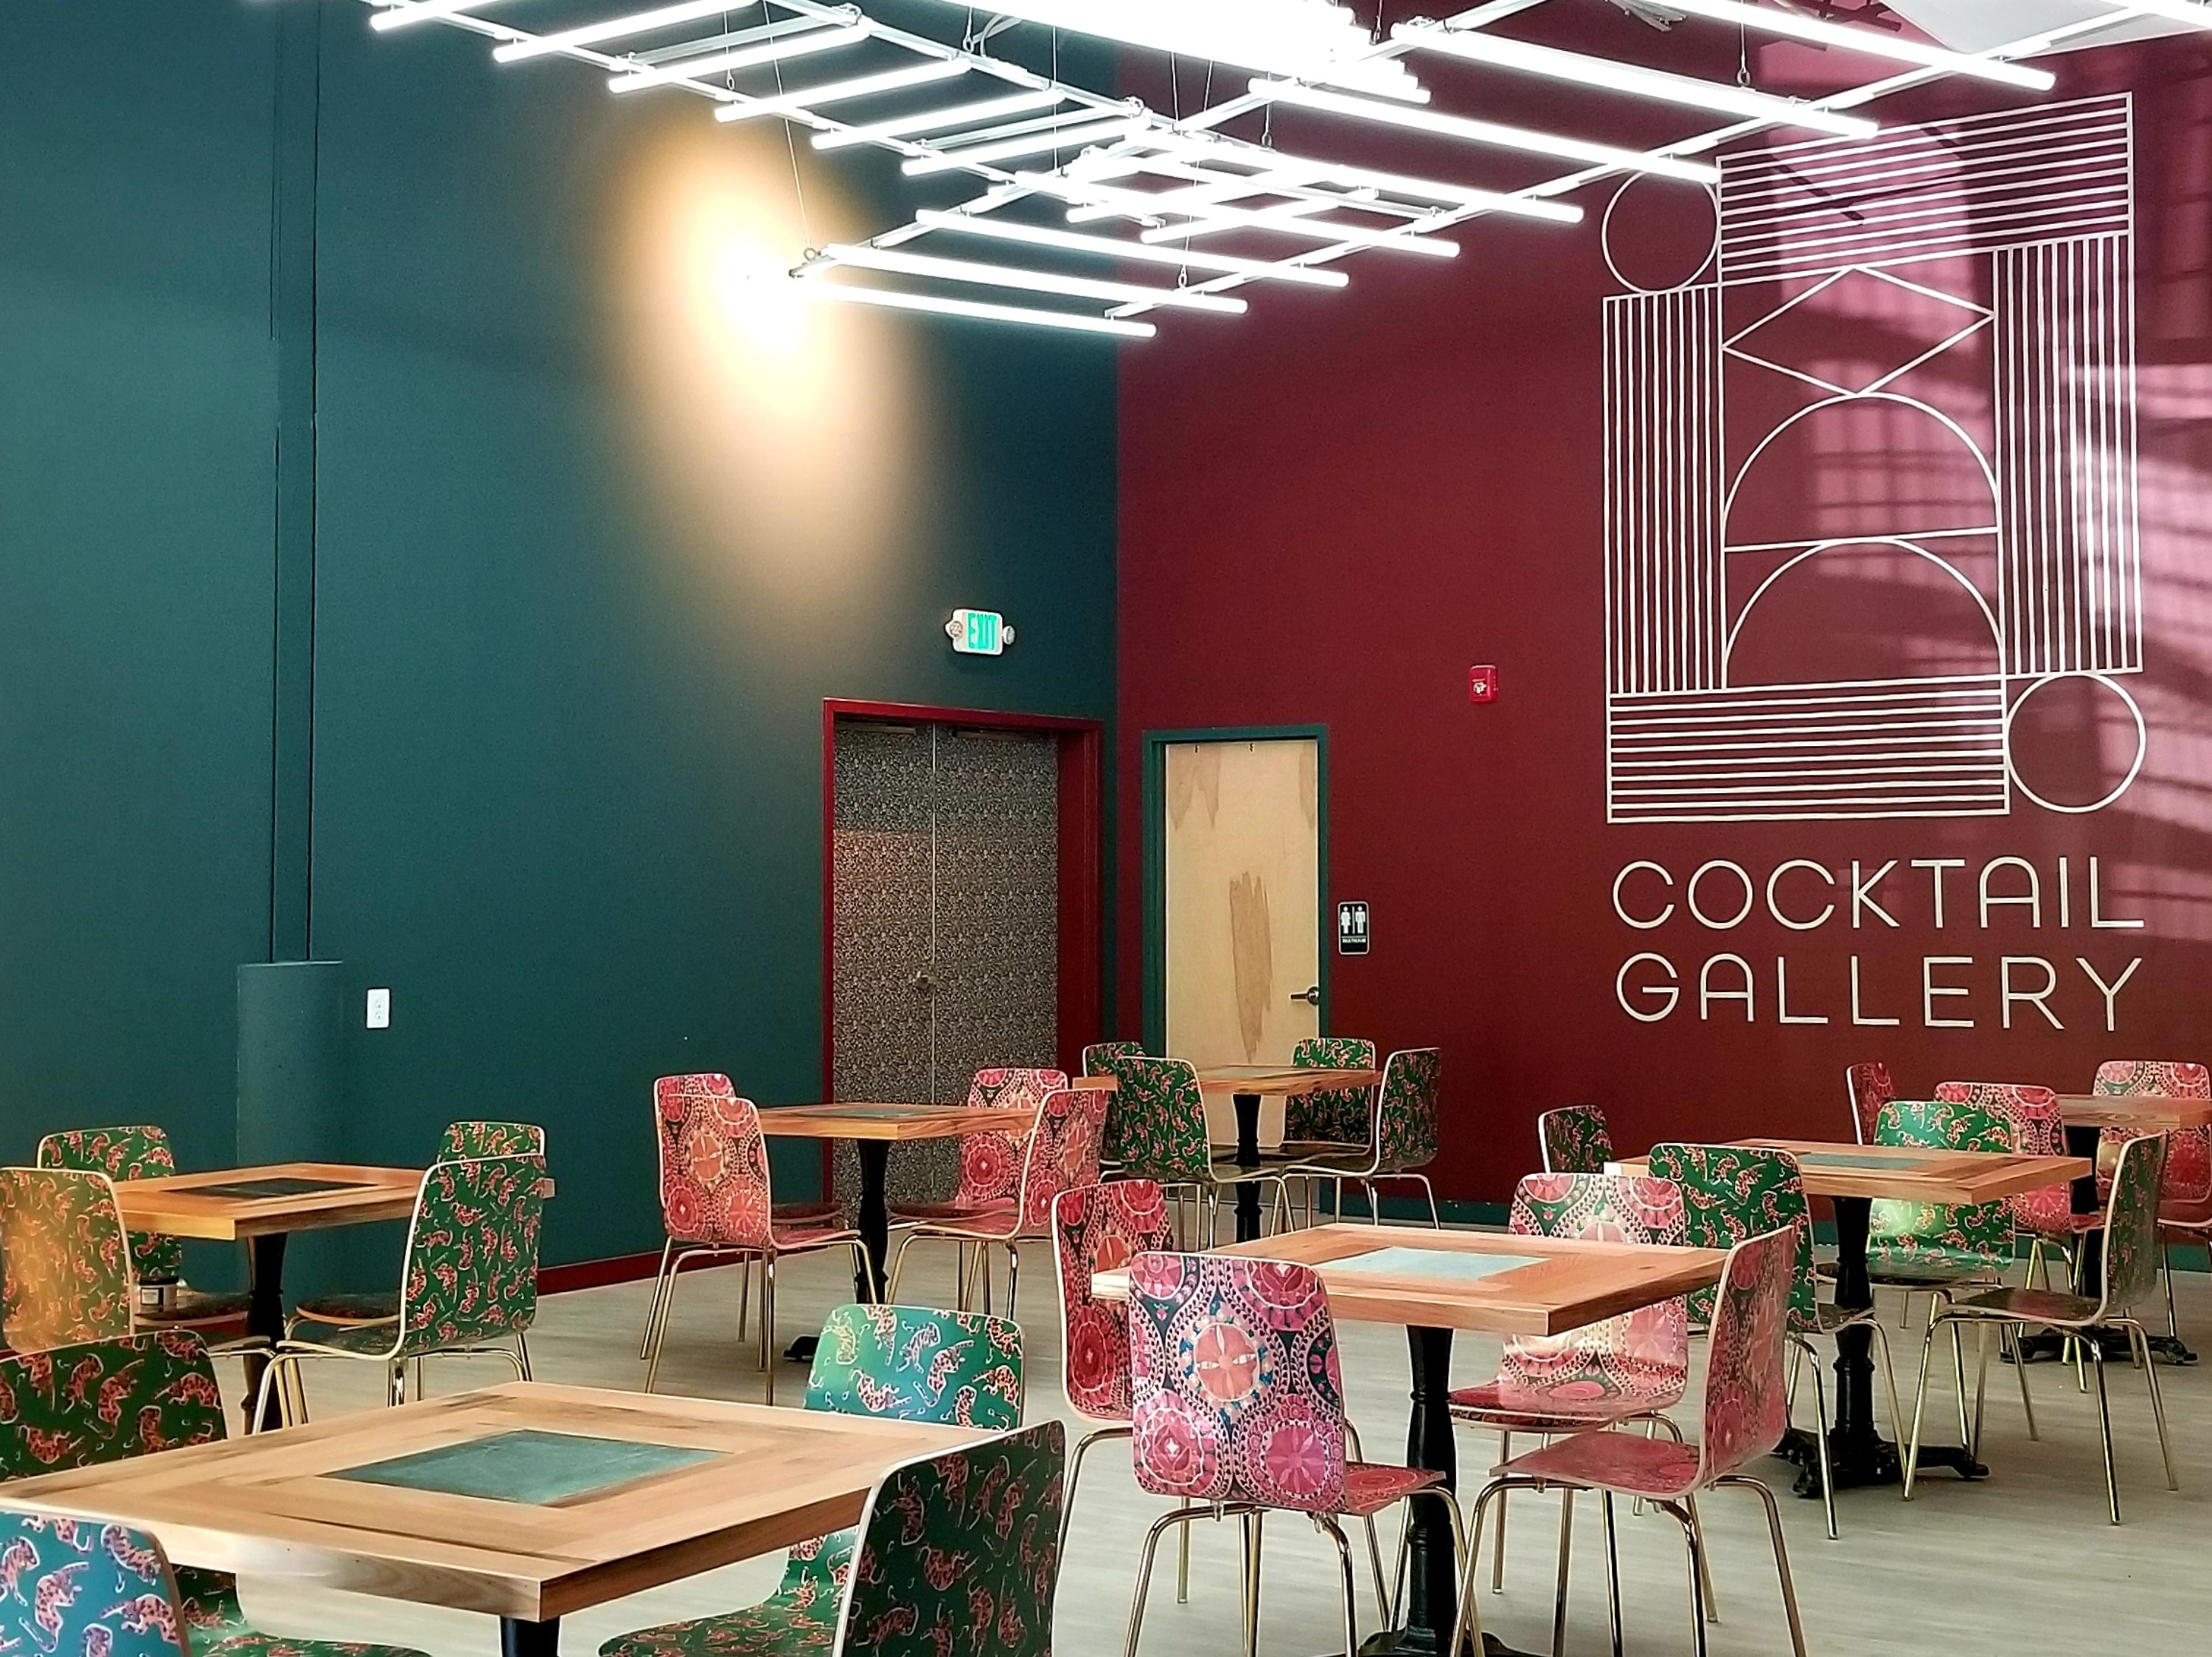 BSC Cocktail Gallery